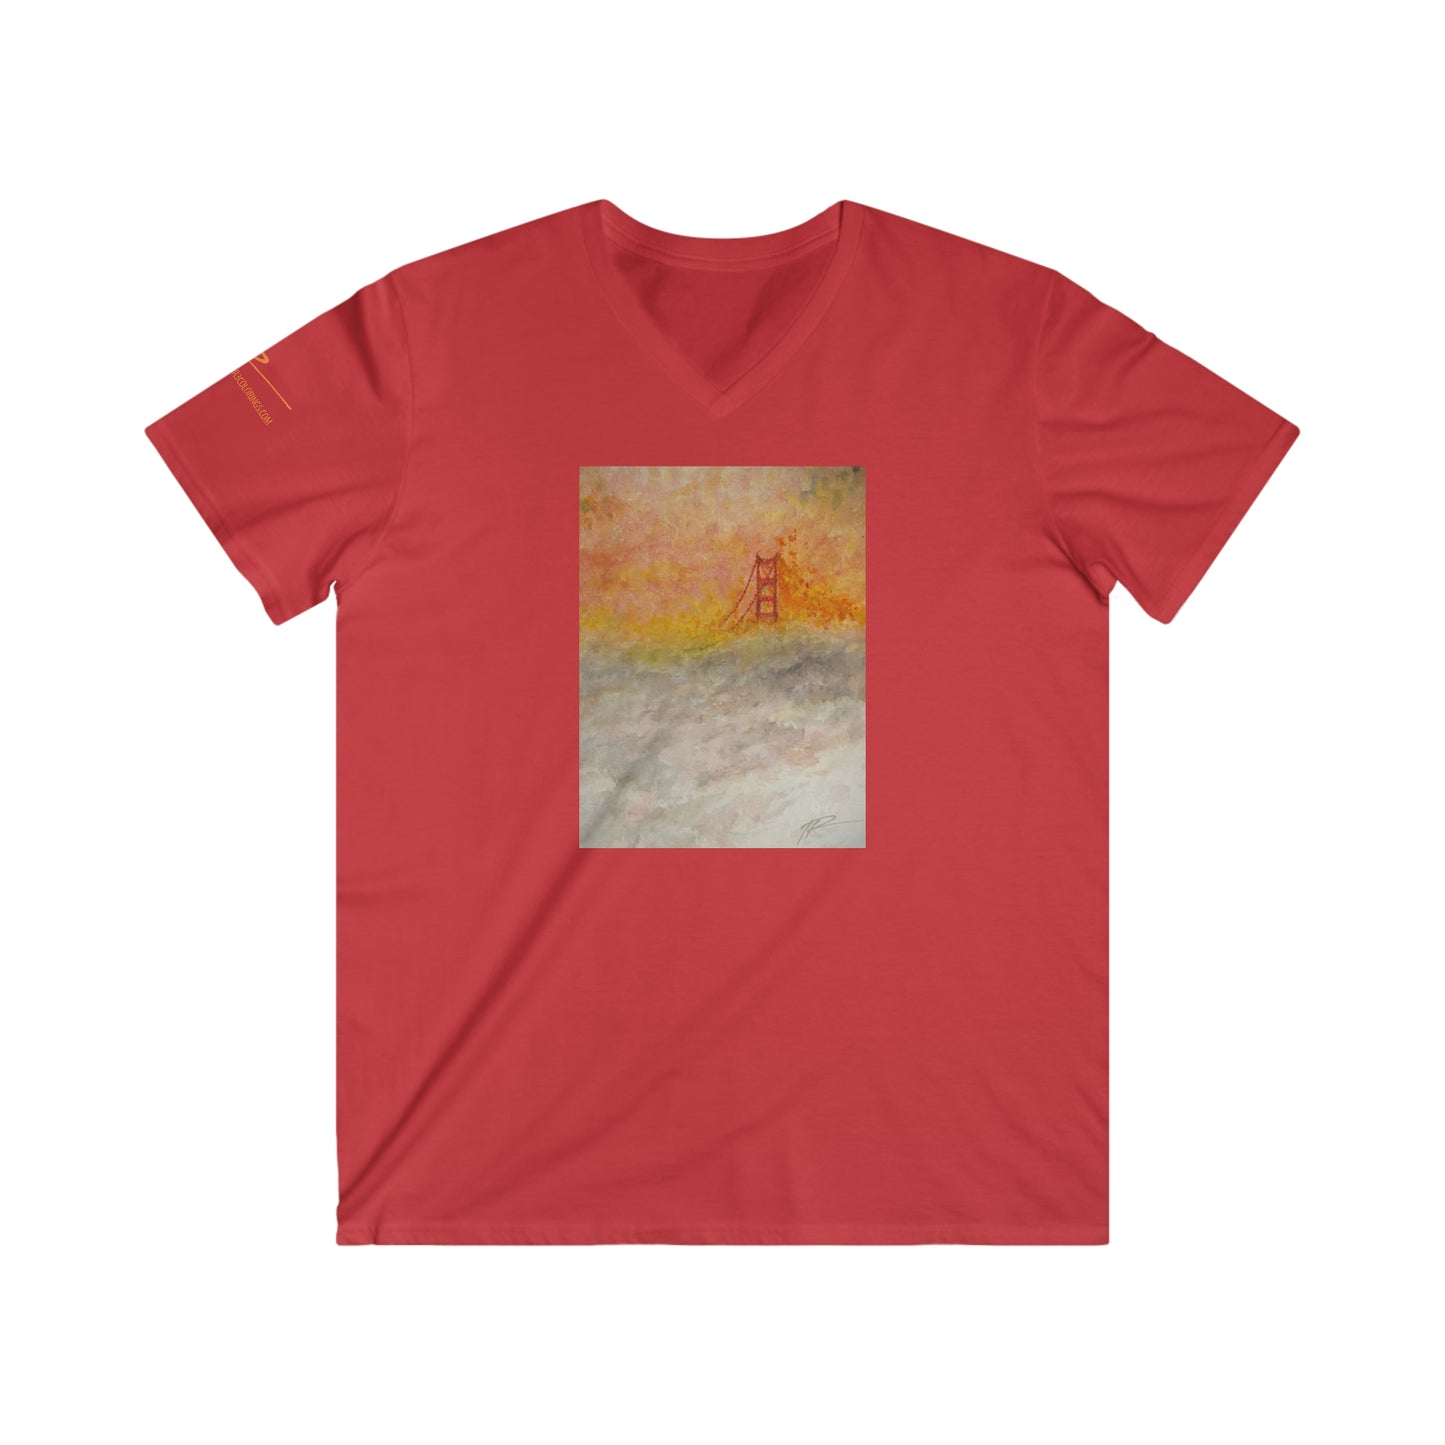 Tipping Points - SF - UltraSoft Unisex V-neck Tee